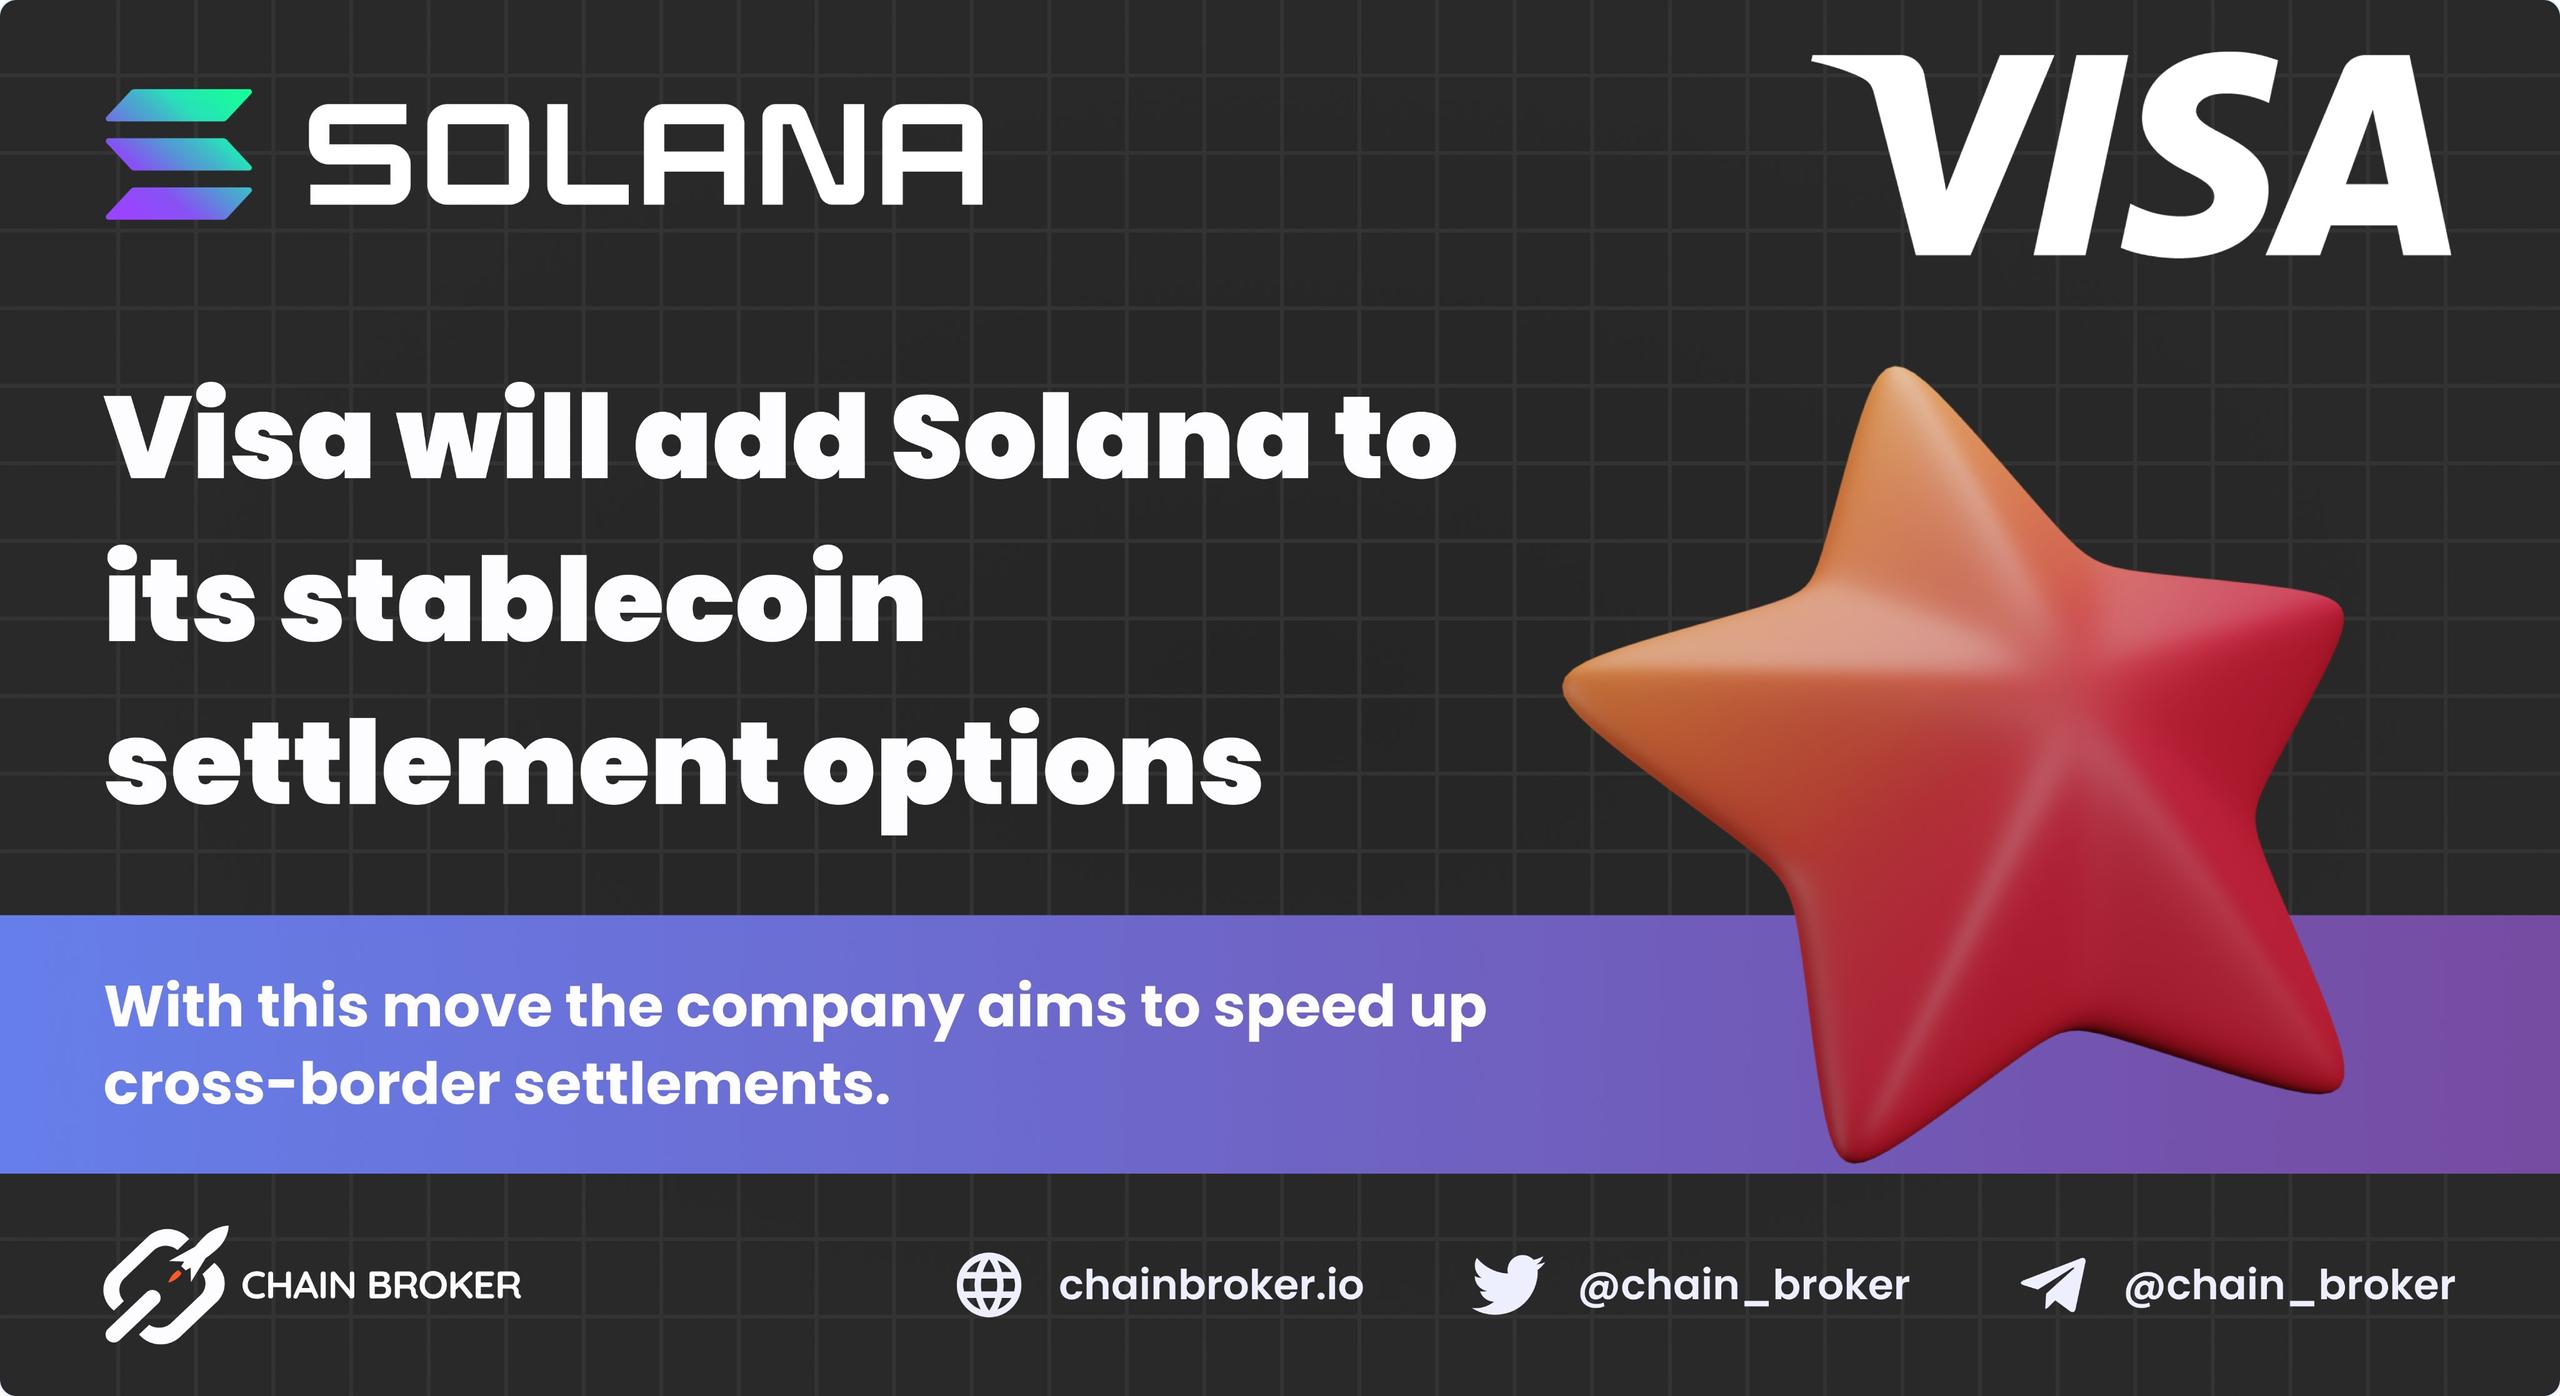 Visa will add Solana to its stablecoin settlement options